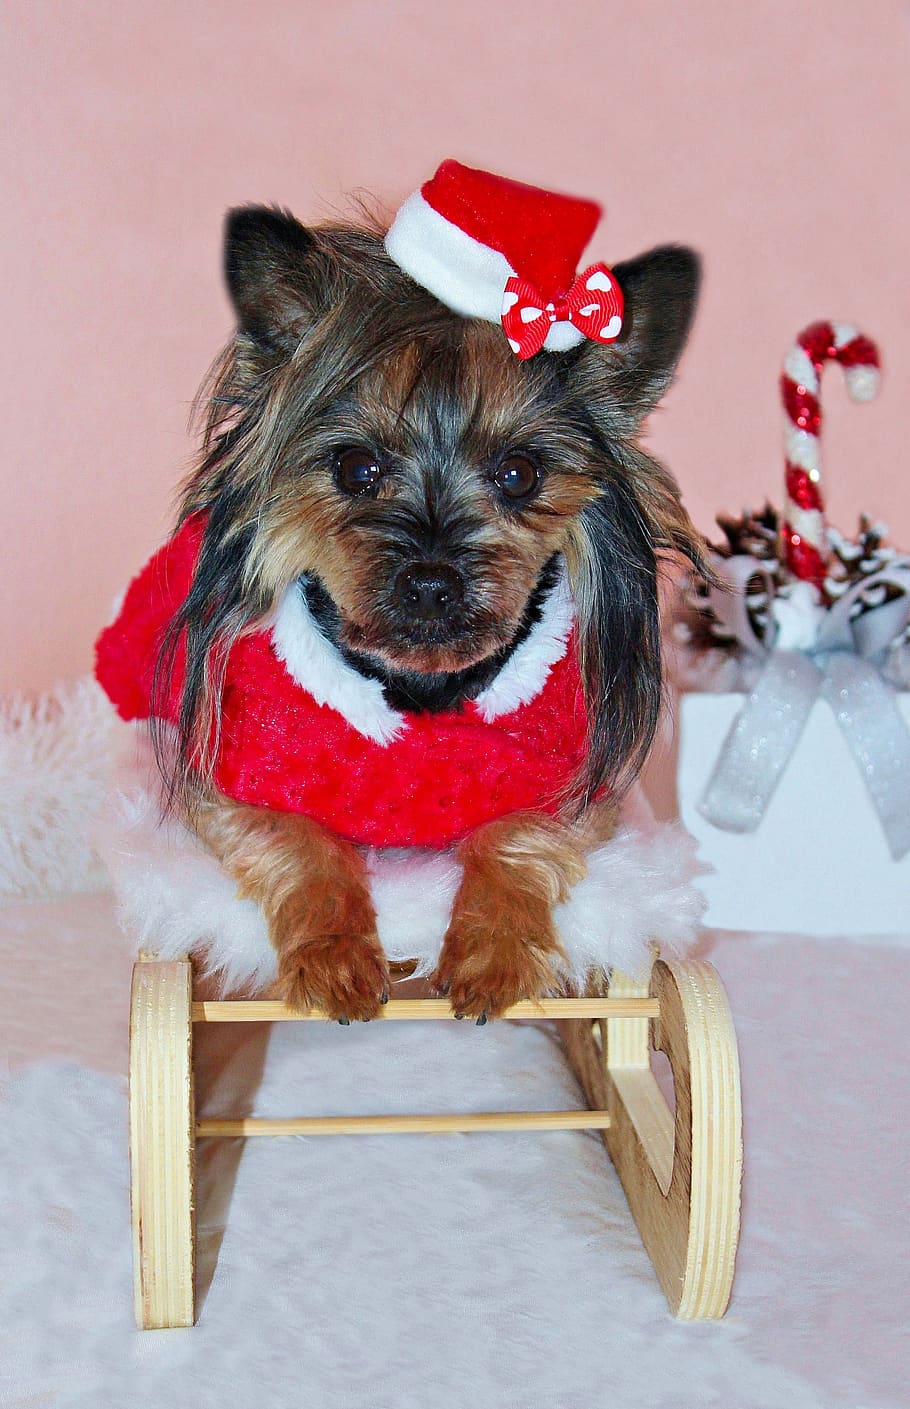 yorkshire terrier, dog, santa claus, cute, sled, cap, dress, one animal, domestic animals, pets